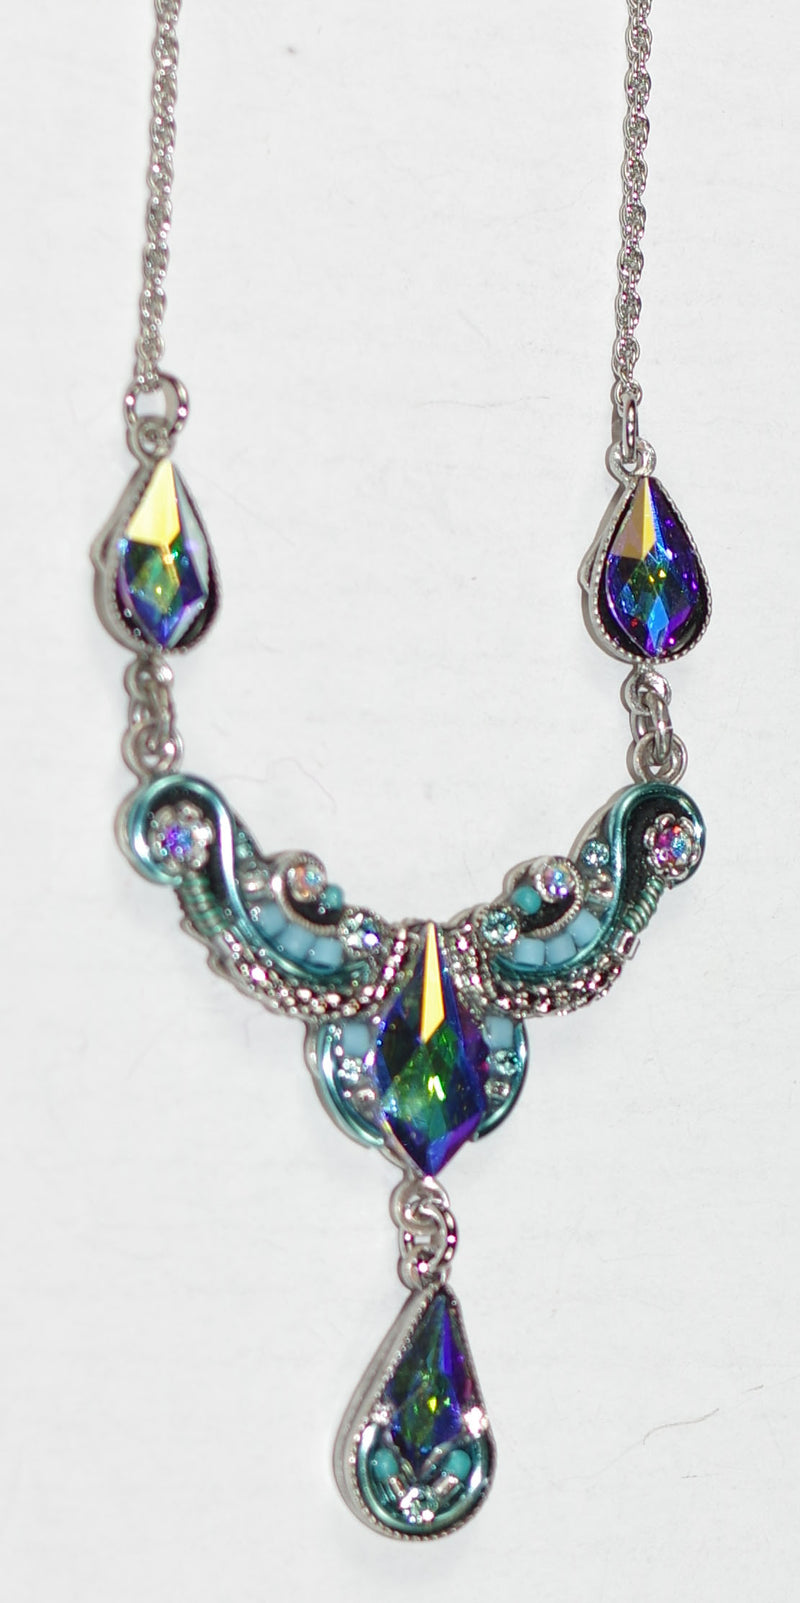 FIREFLY NECKLACE LILY ORGANIC ICE: multi color stones in 2 " wide setting, silver 18" adjustable chain